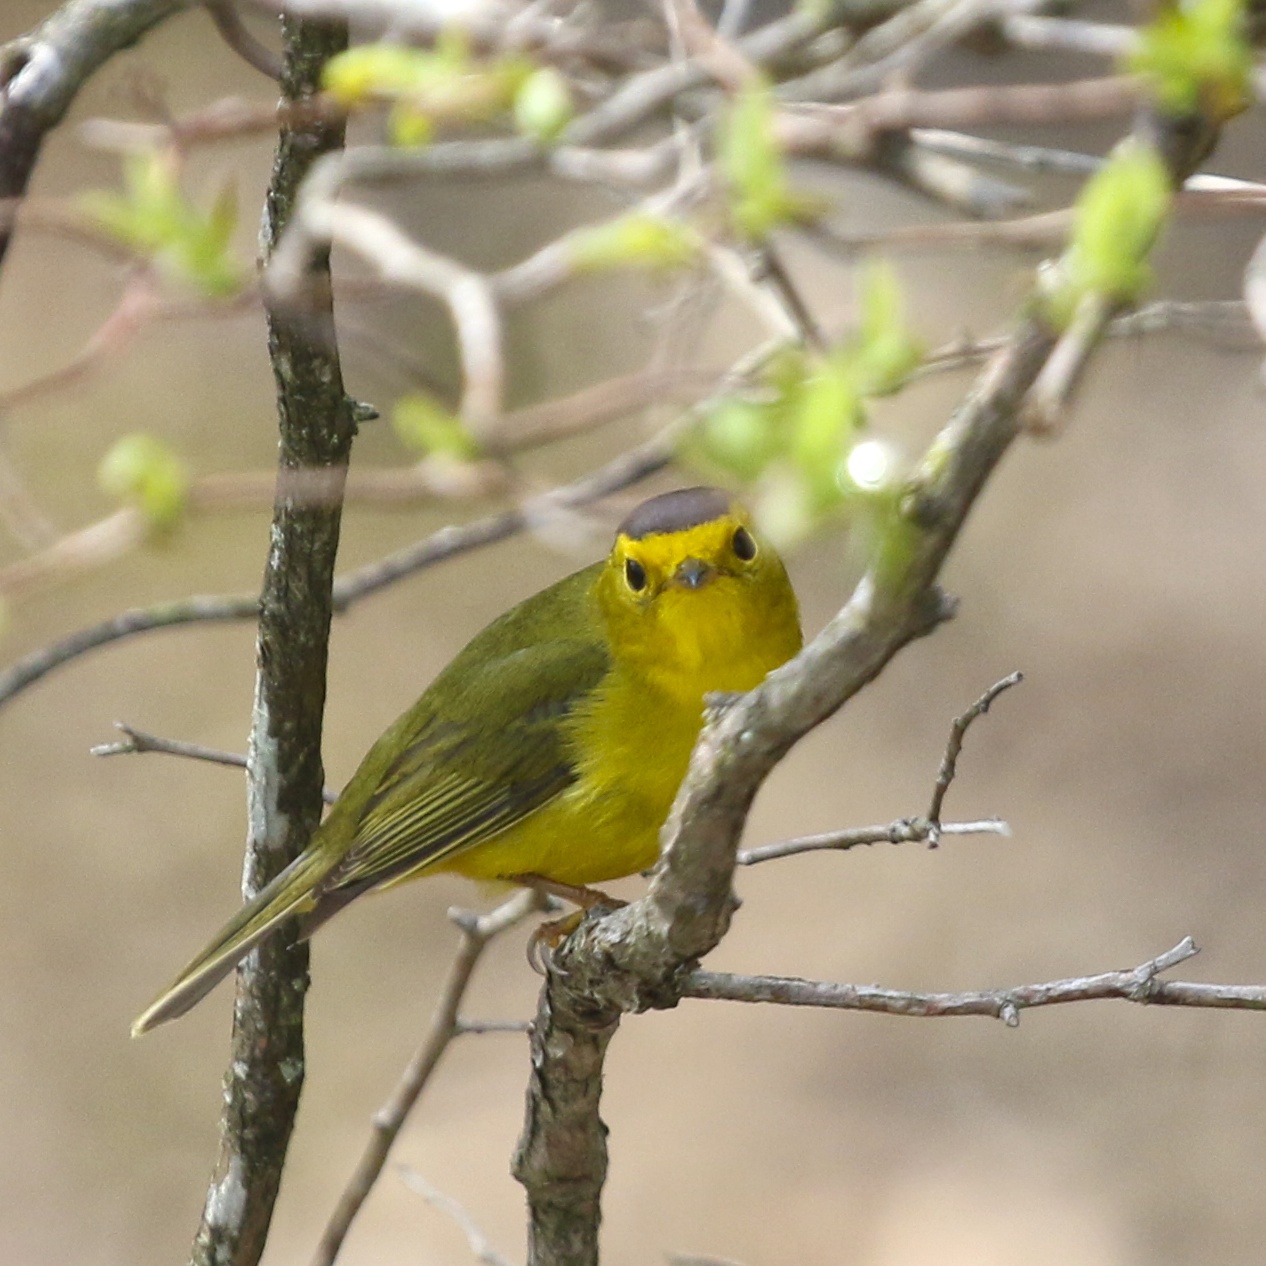 One of three WILSON'S WARBLERS we had at the Bashakill State WMA, 5/8/14.